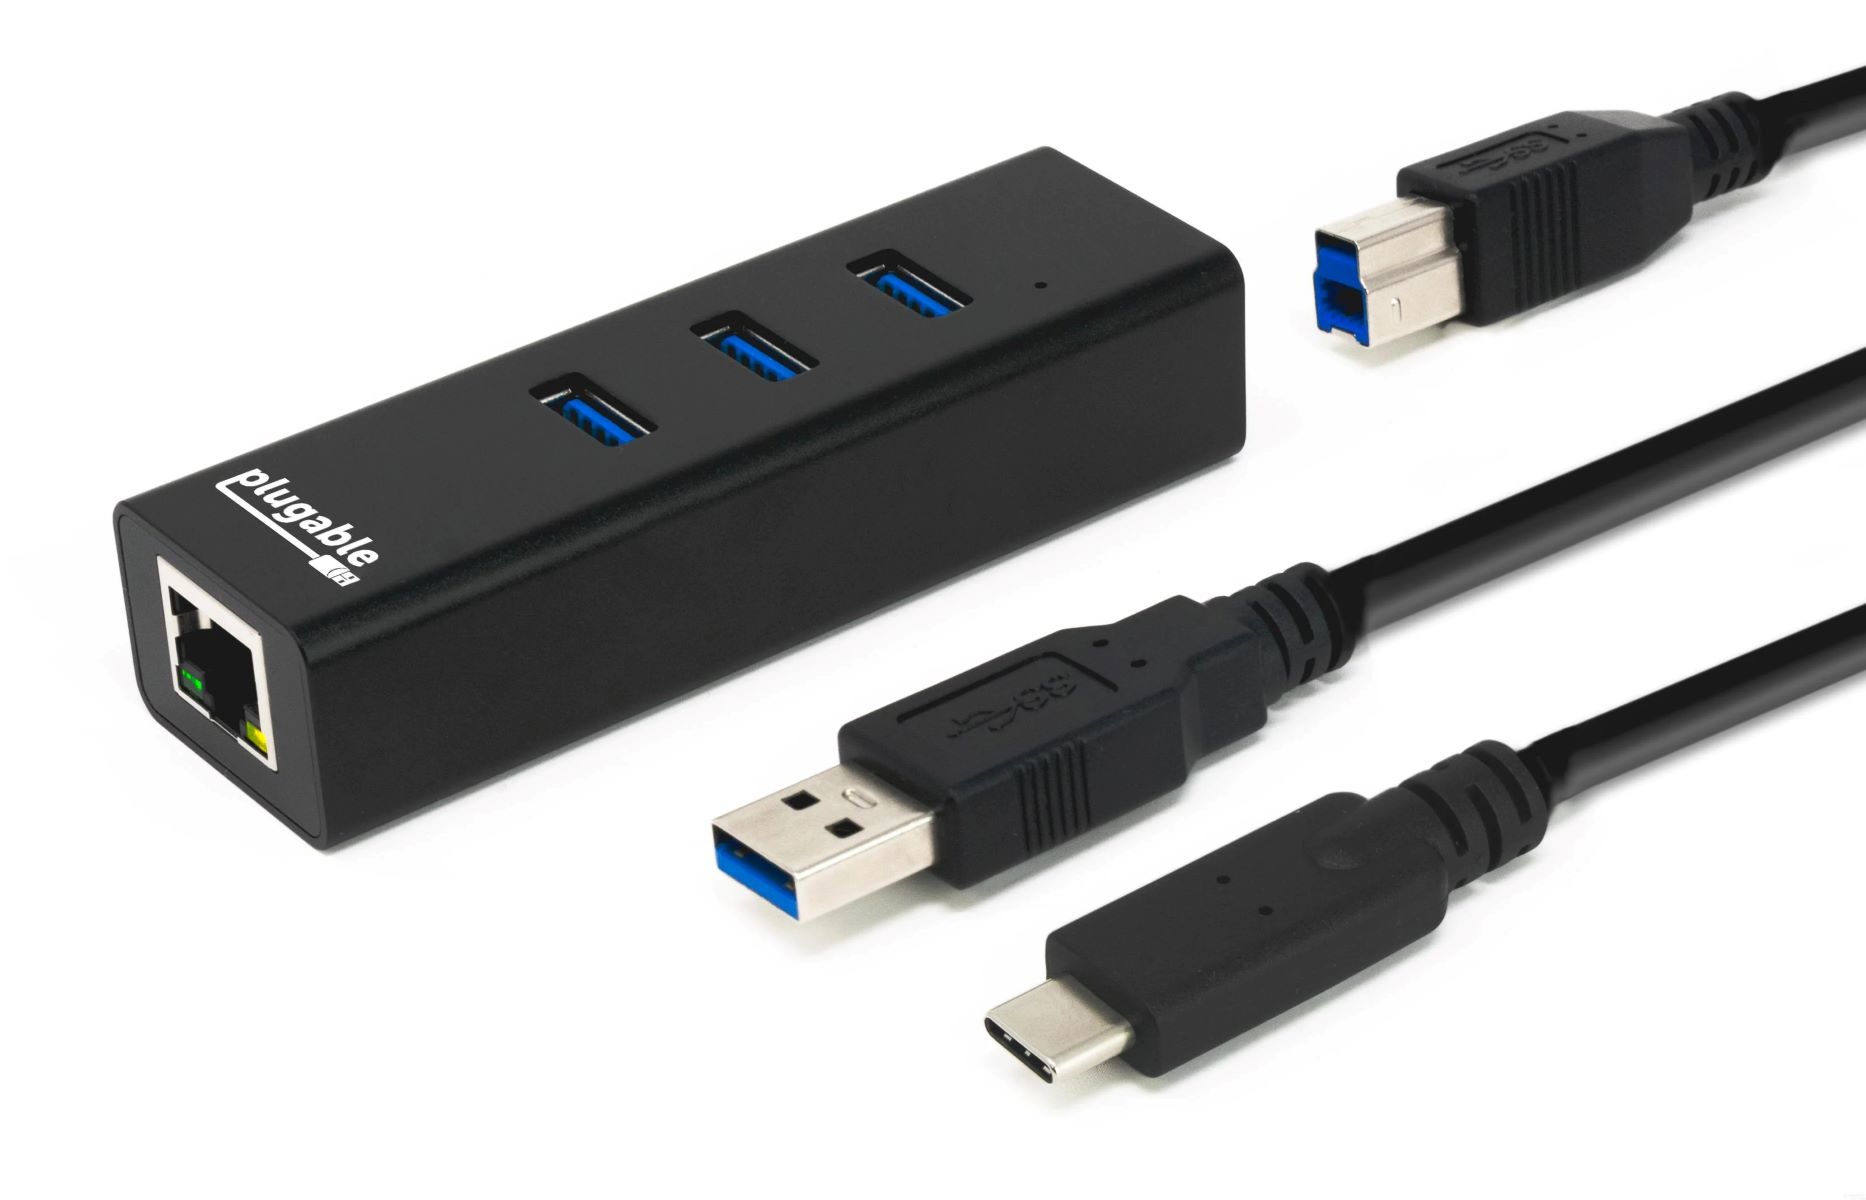 How To Use The Ethernet Port Of A USB Hub